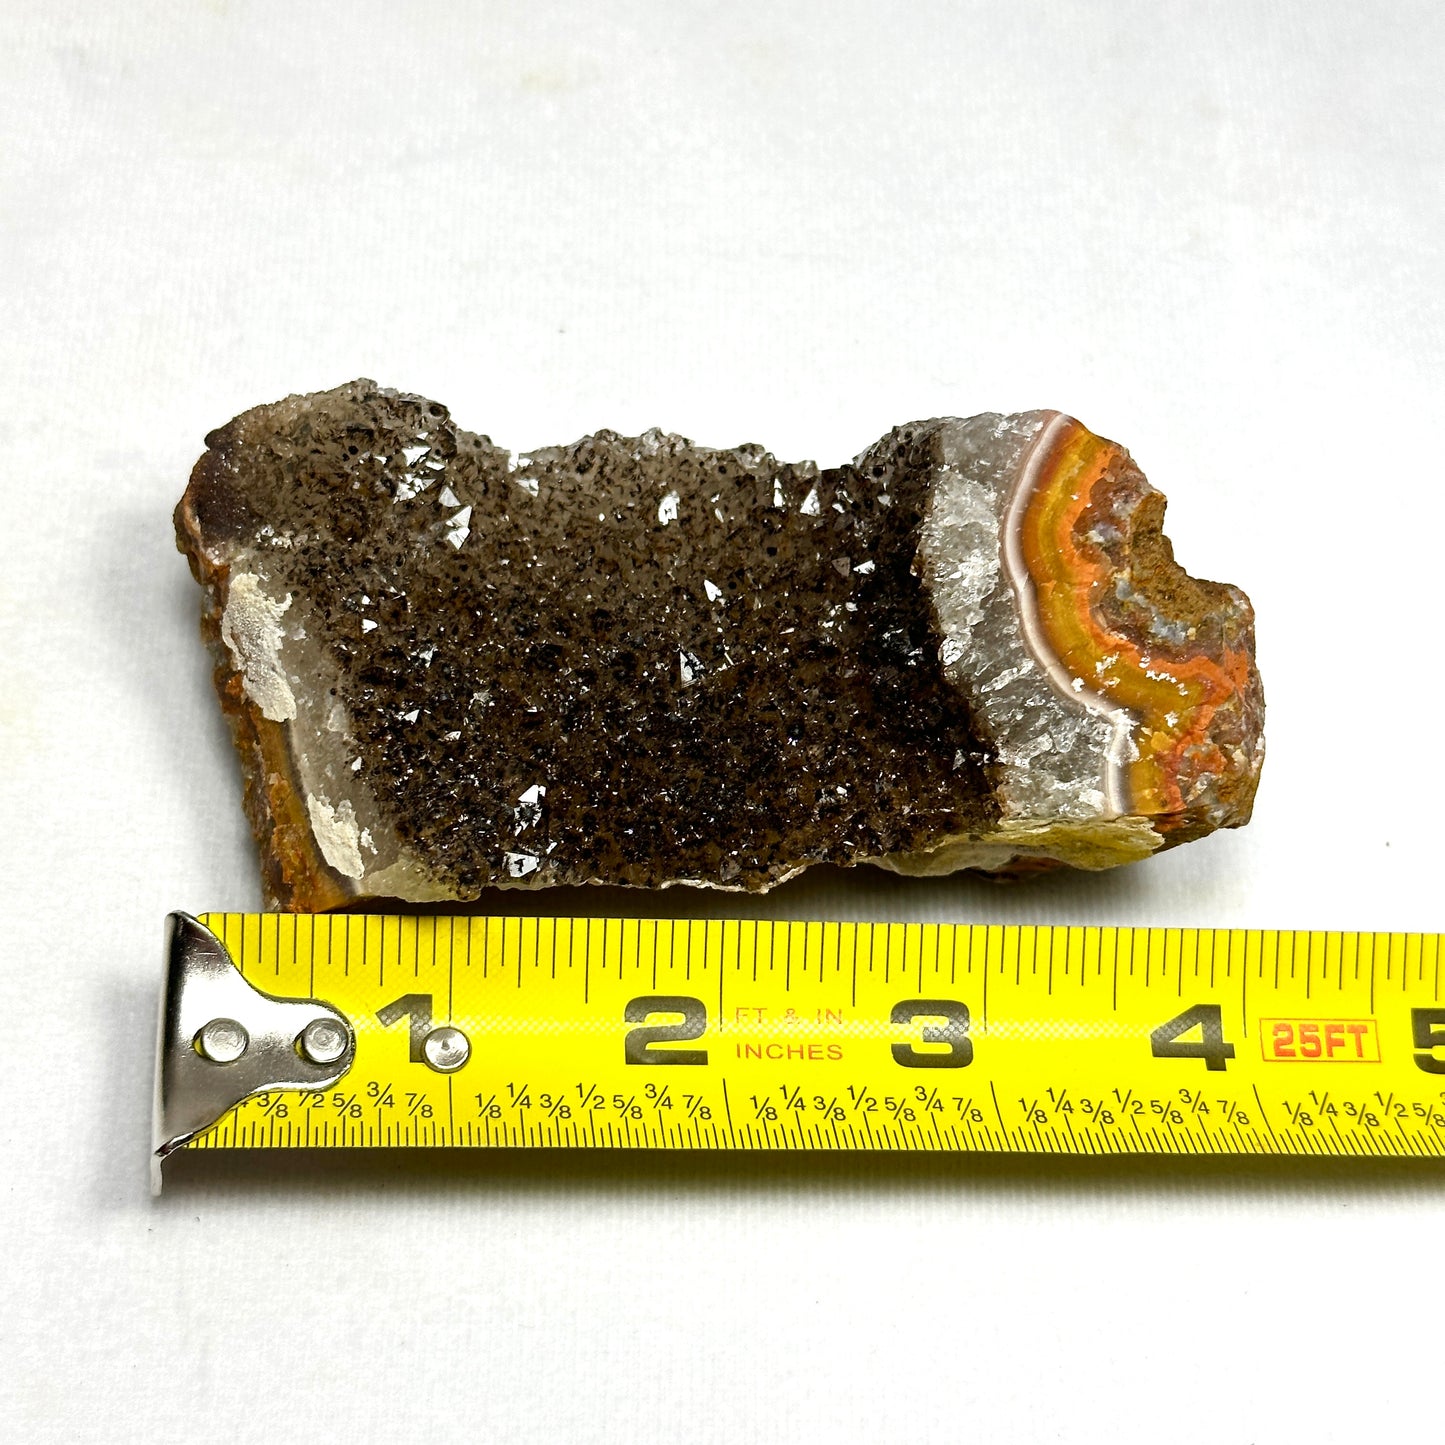 Authentic Manganese Geode